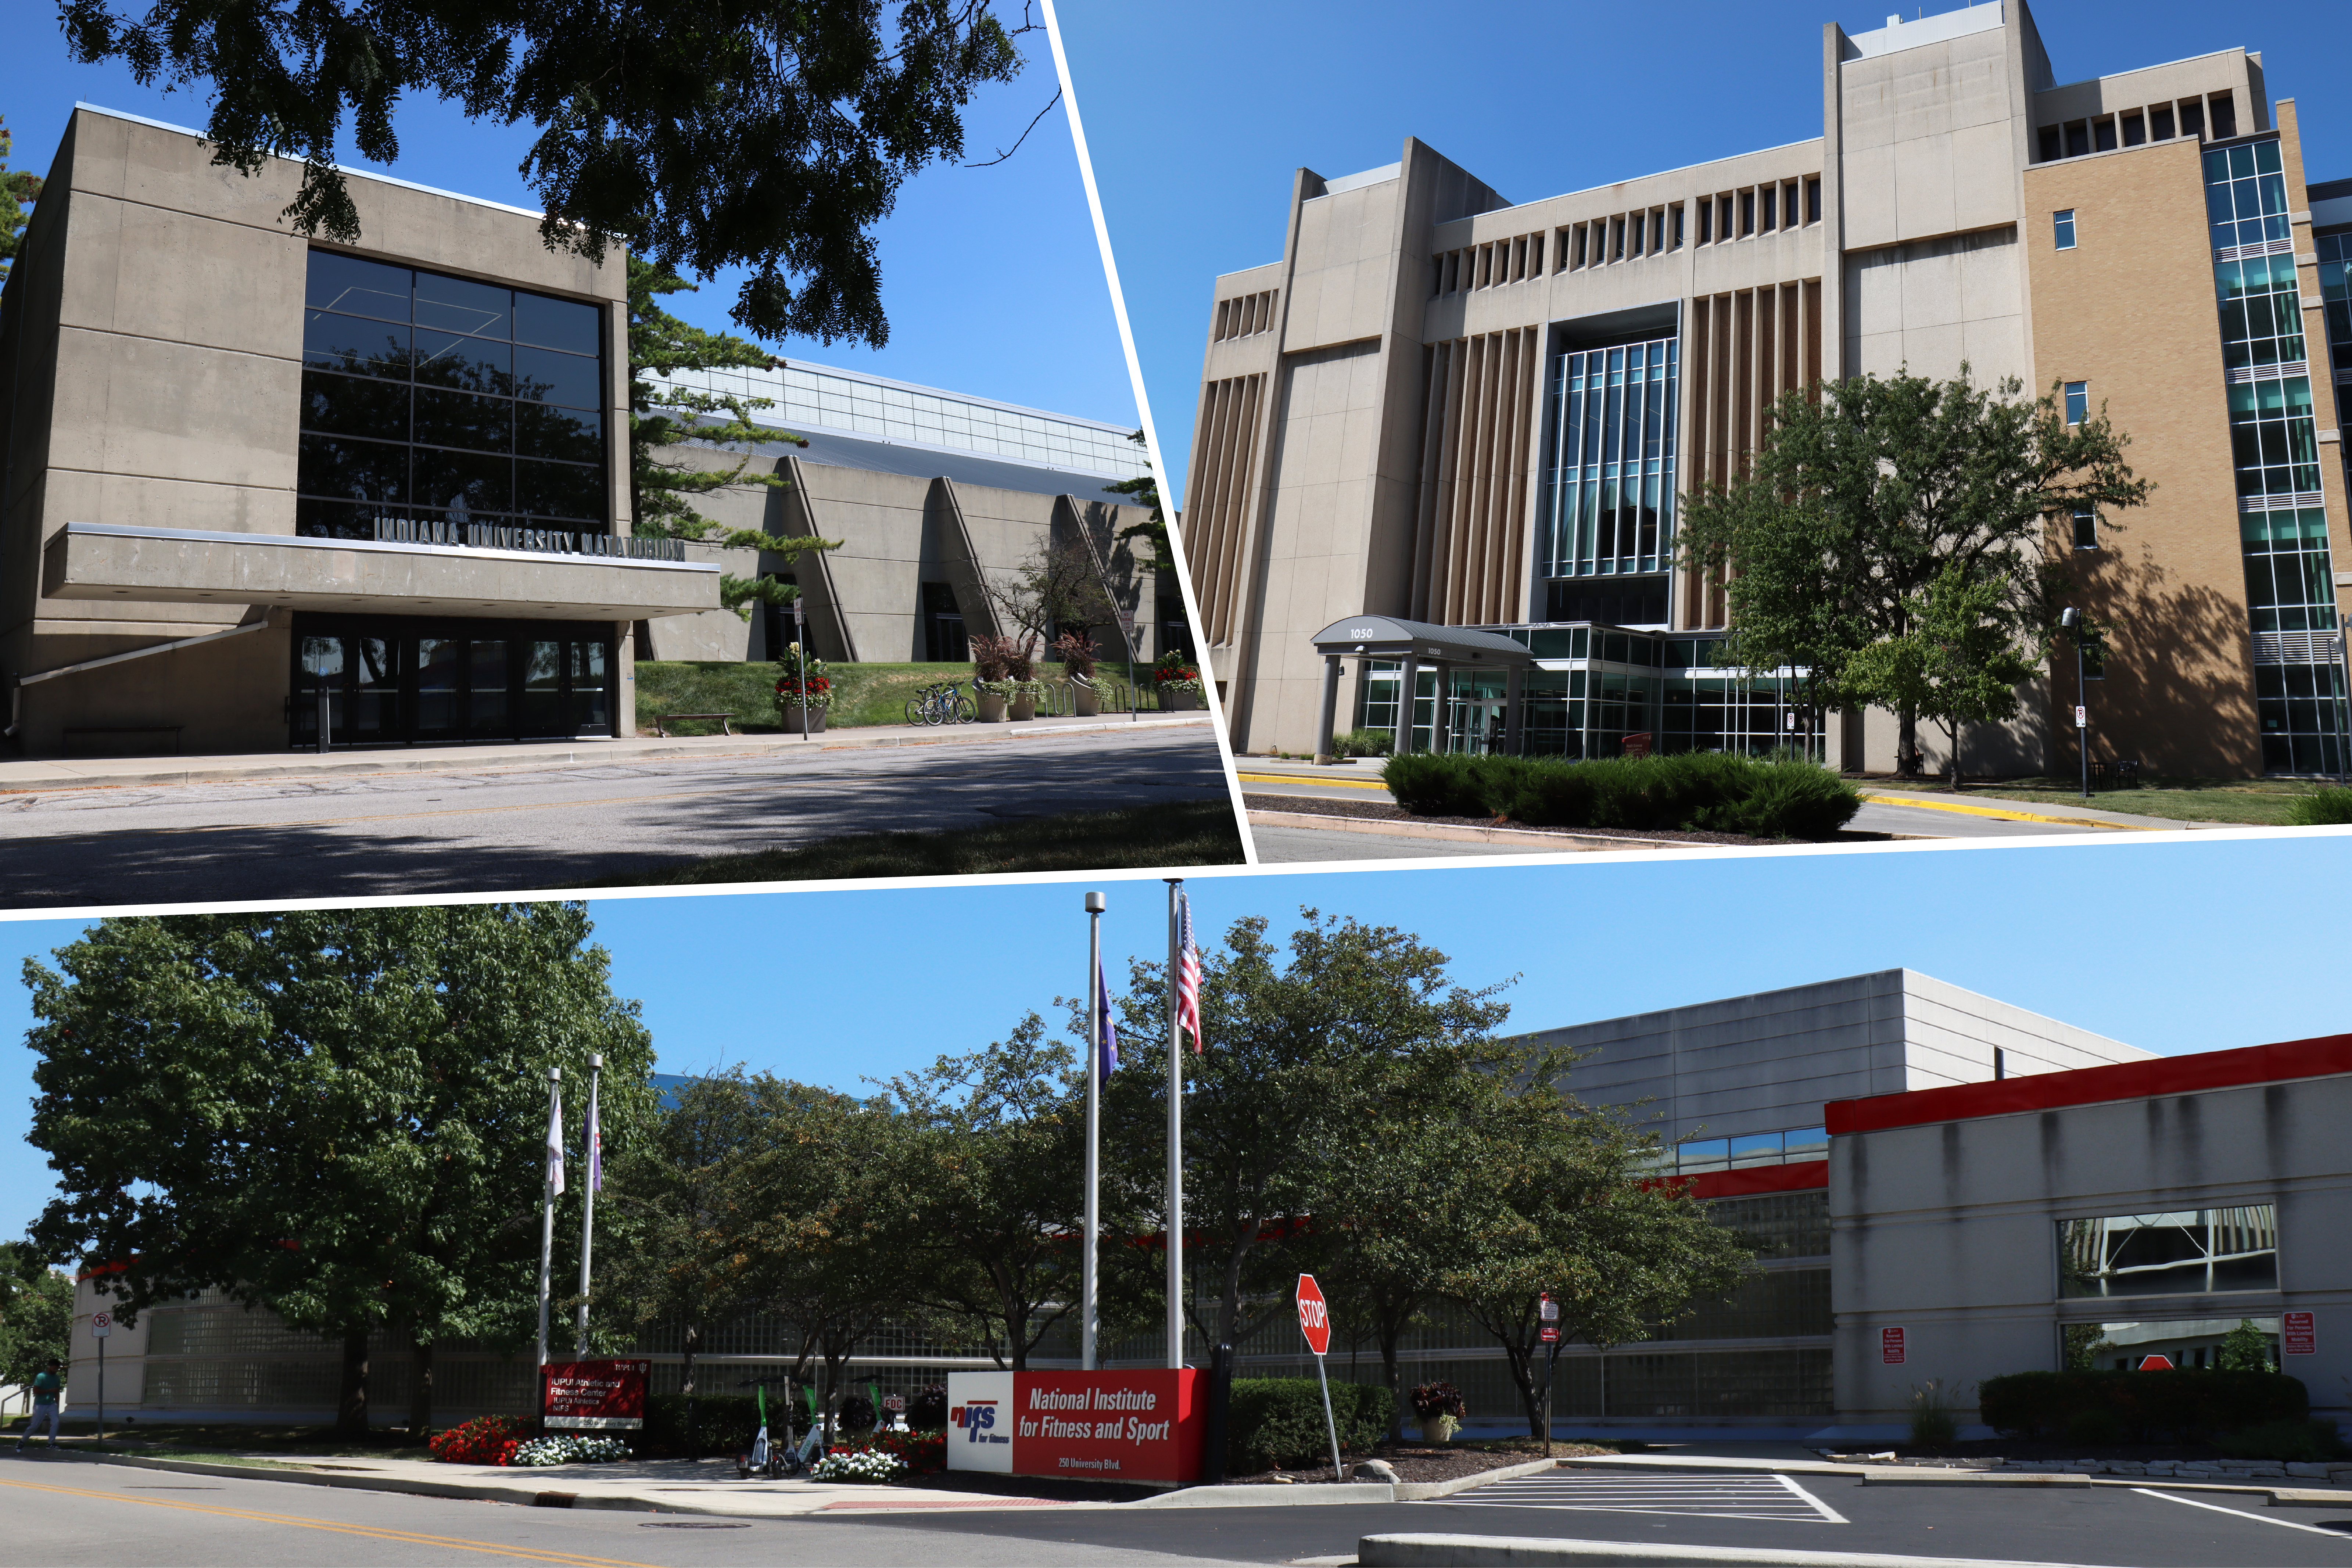 Three total images combined. Top left is the IU Natatorium entrance. Top right is the Health Sciences building. Bottom is the National Institute for Fitness and Sport. 